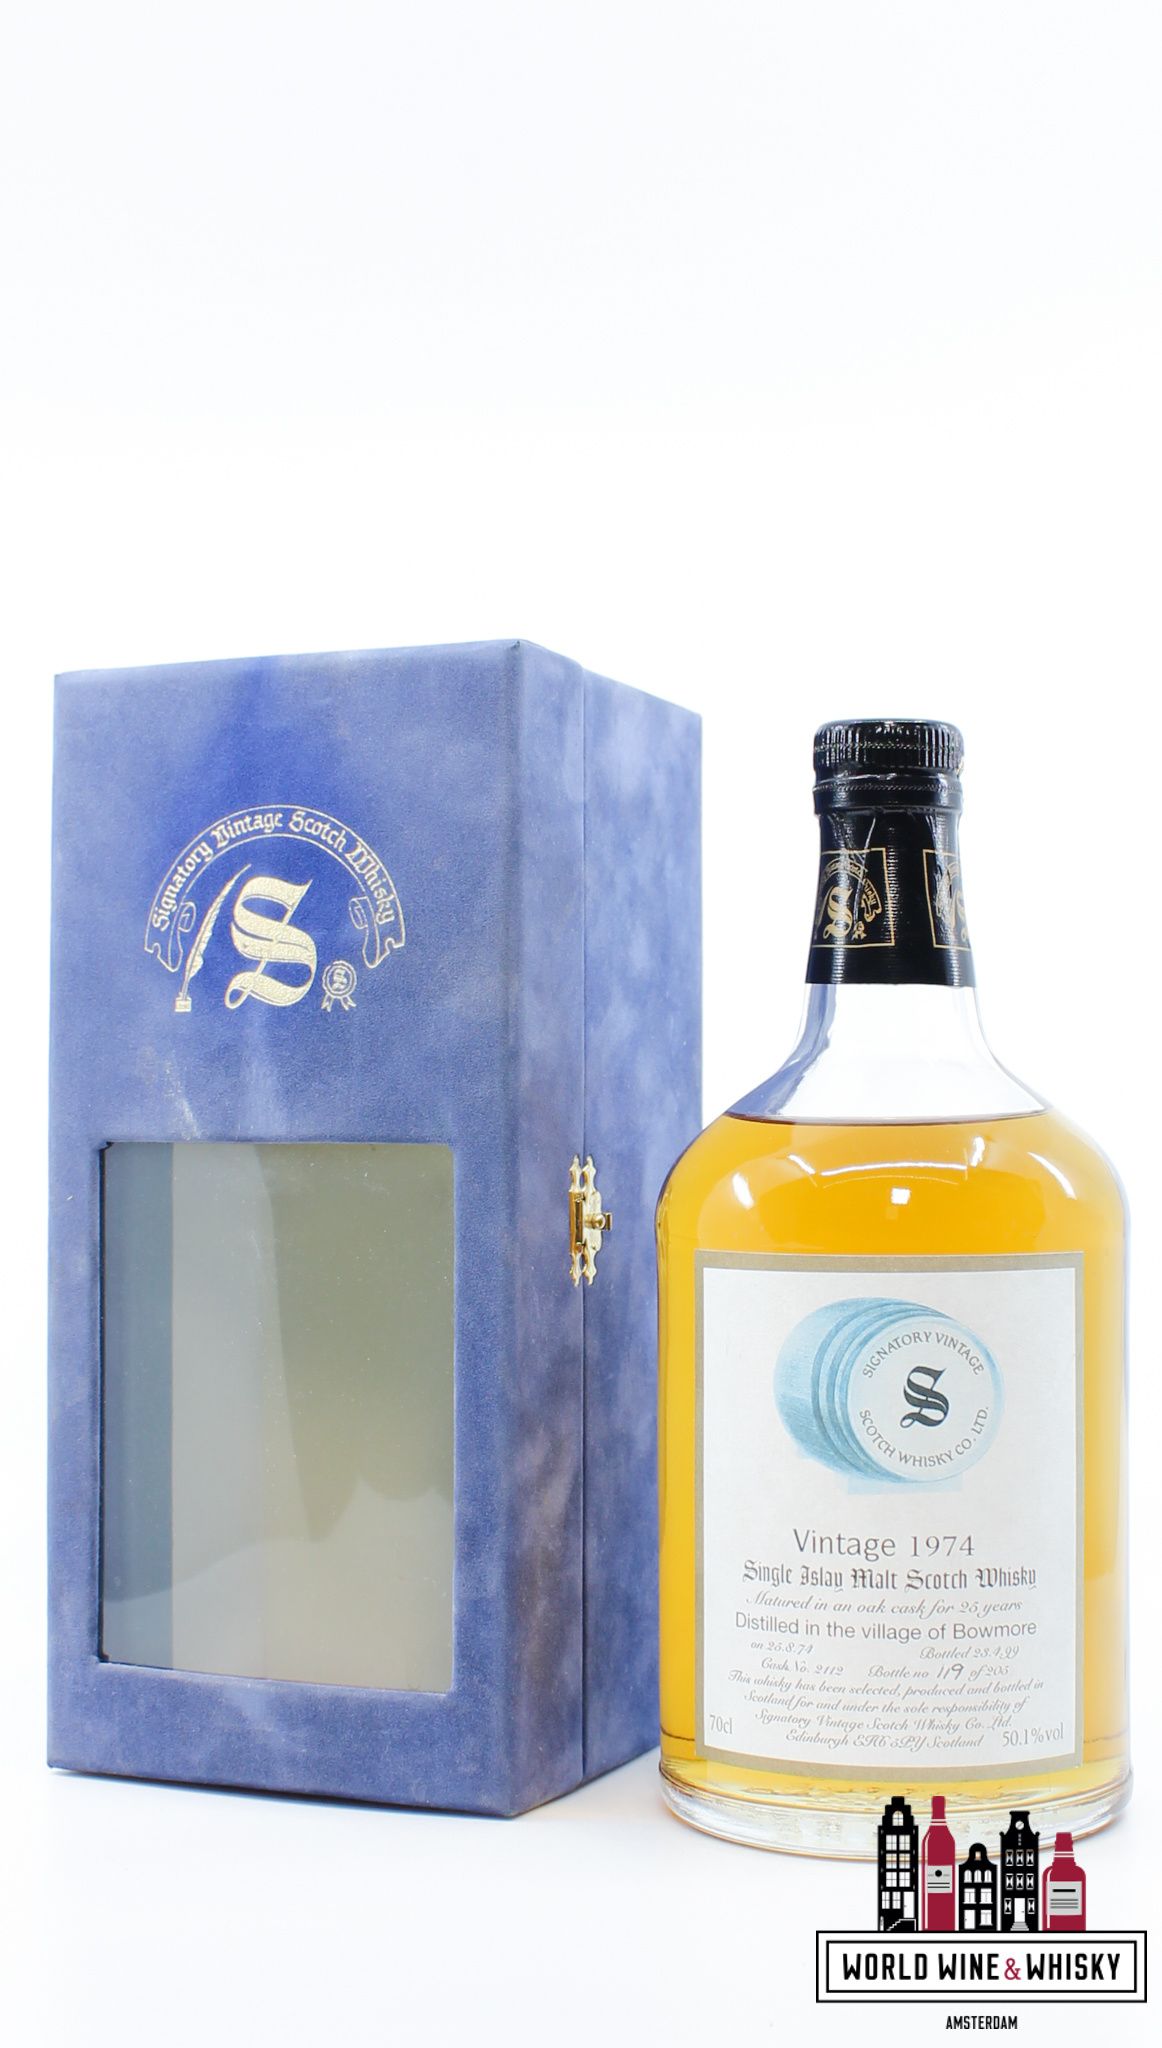 Bowmore Bowmore 25 Years Old 1974 1999 - Vintage Collection - Signatory Vintage - Cask 2112 50.1% (1 of 205)